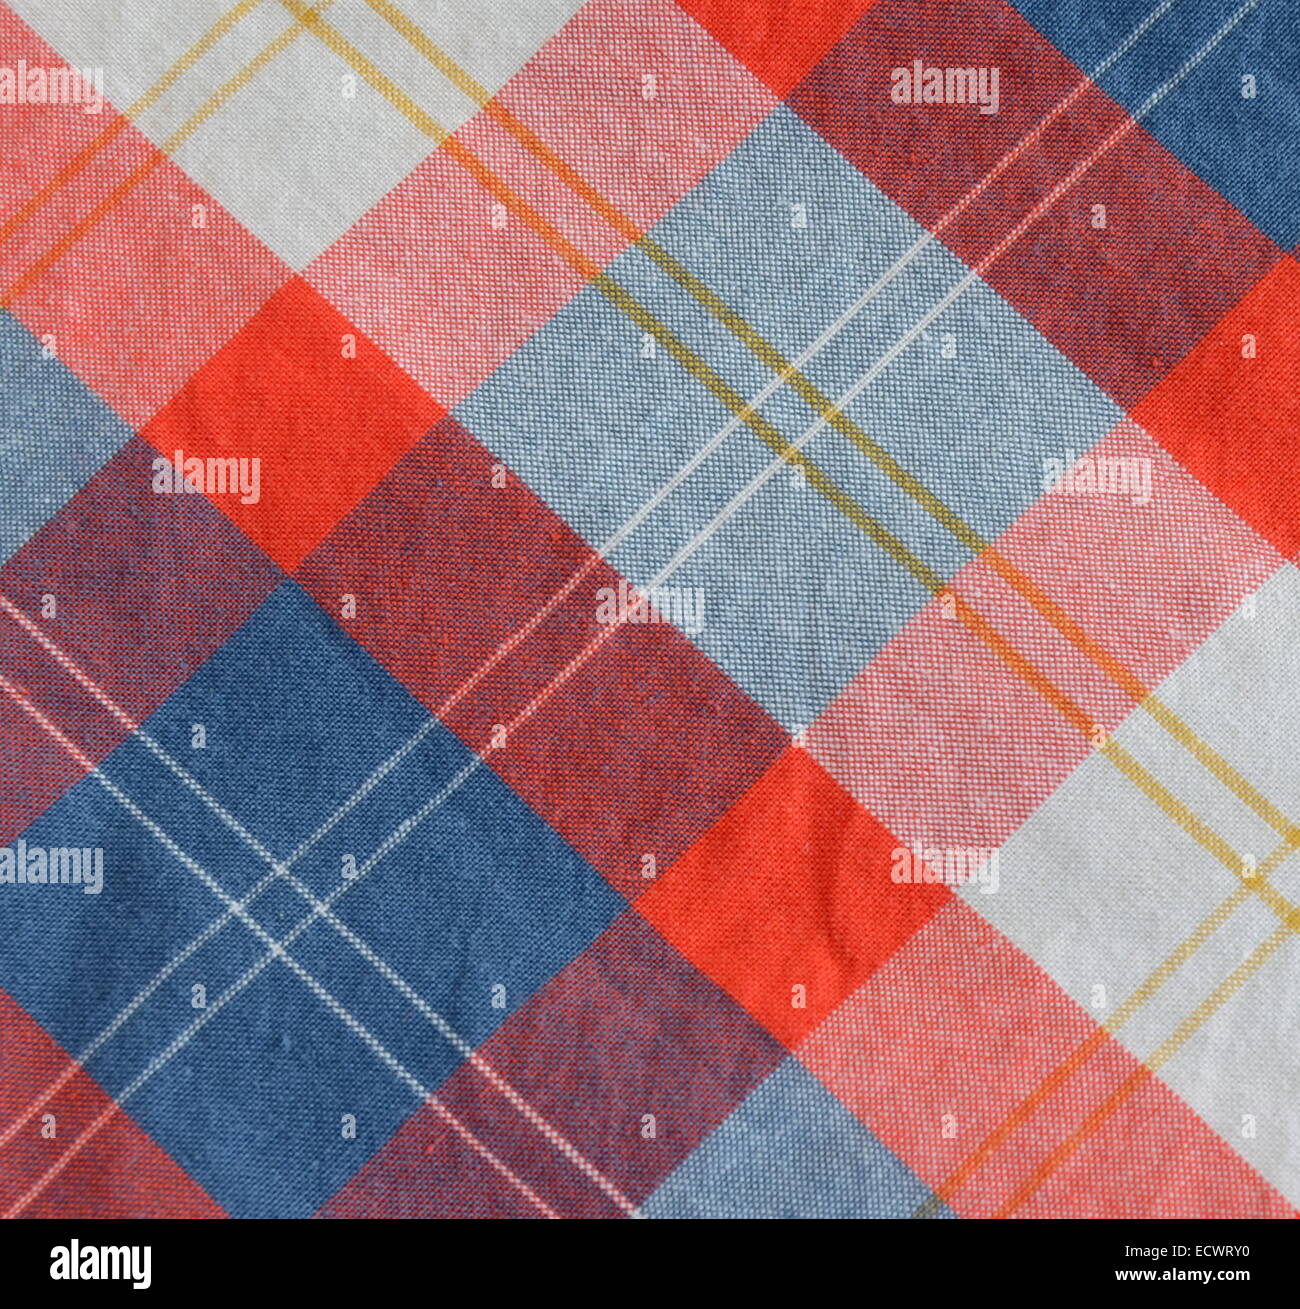 Red, Blue And White Plaid Table Cloth Stock Photo